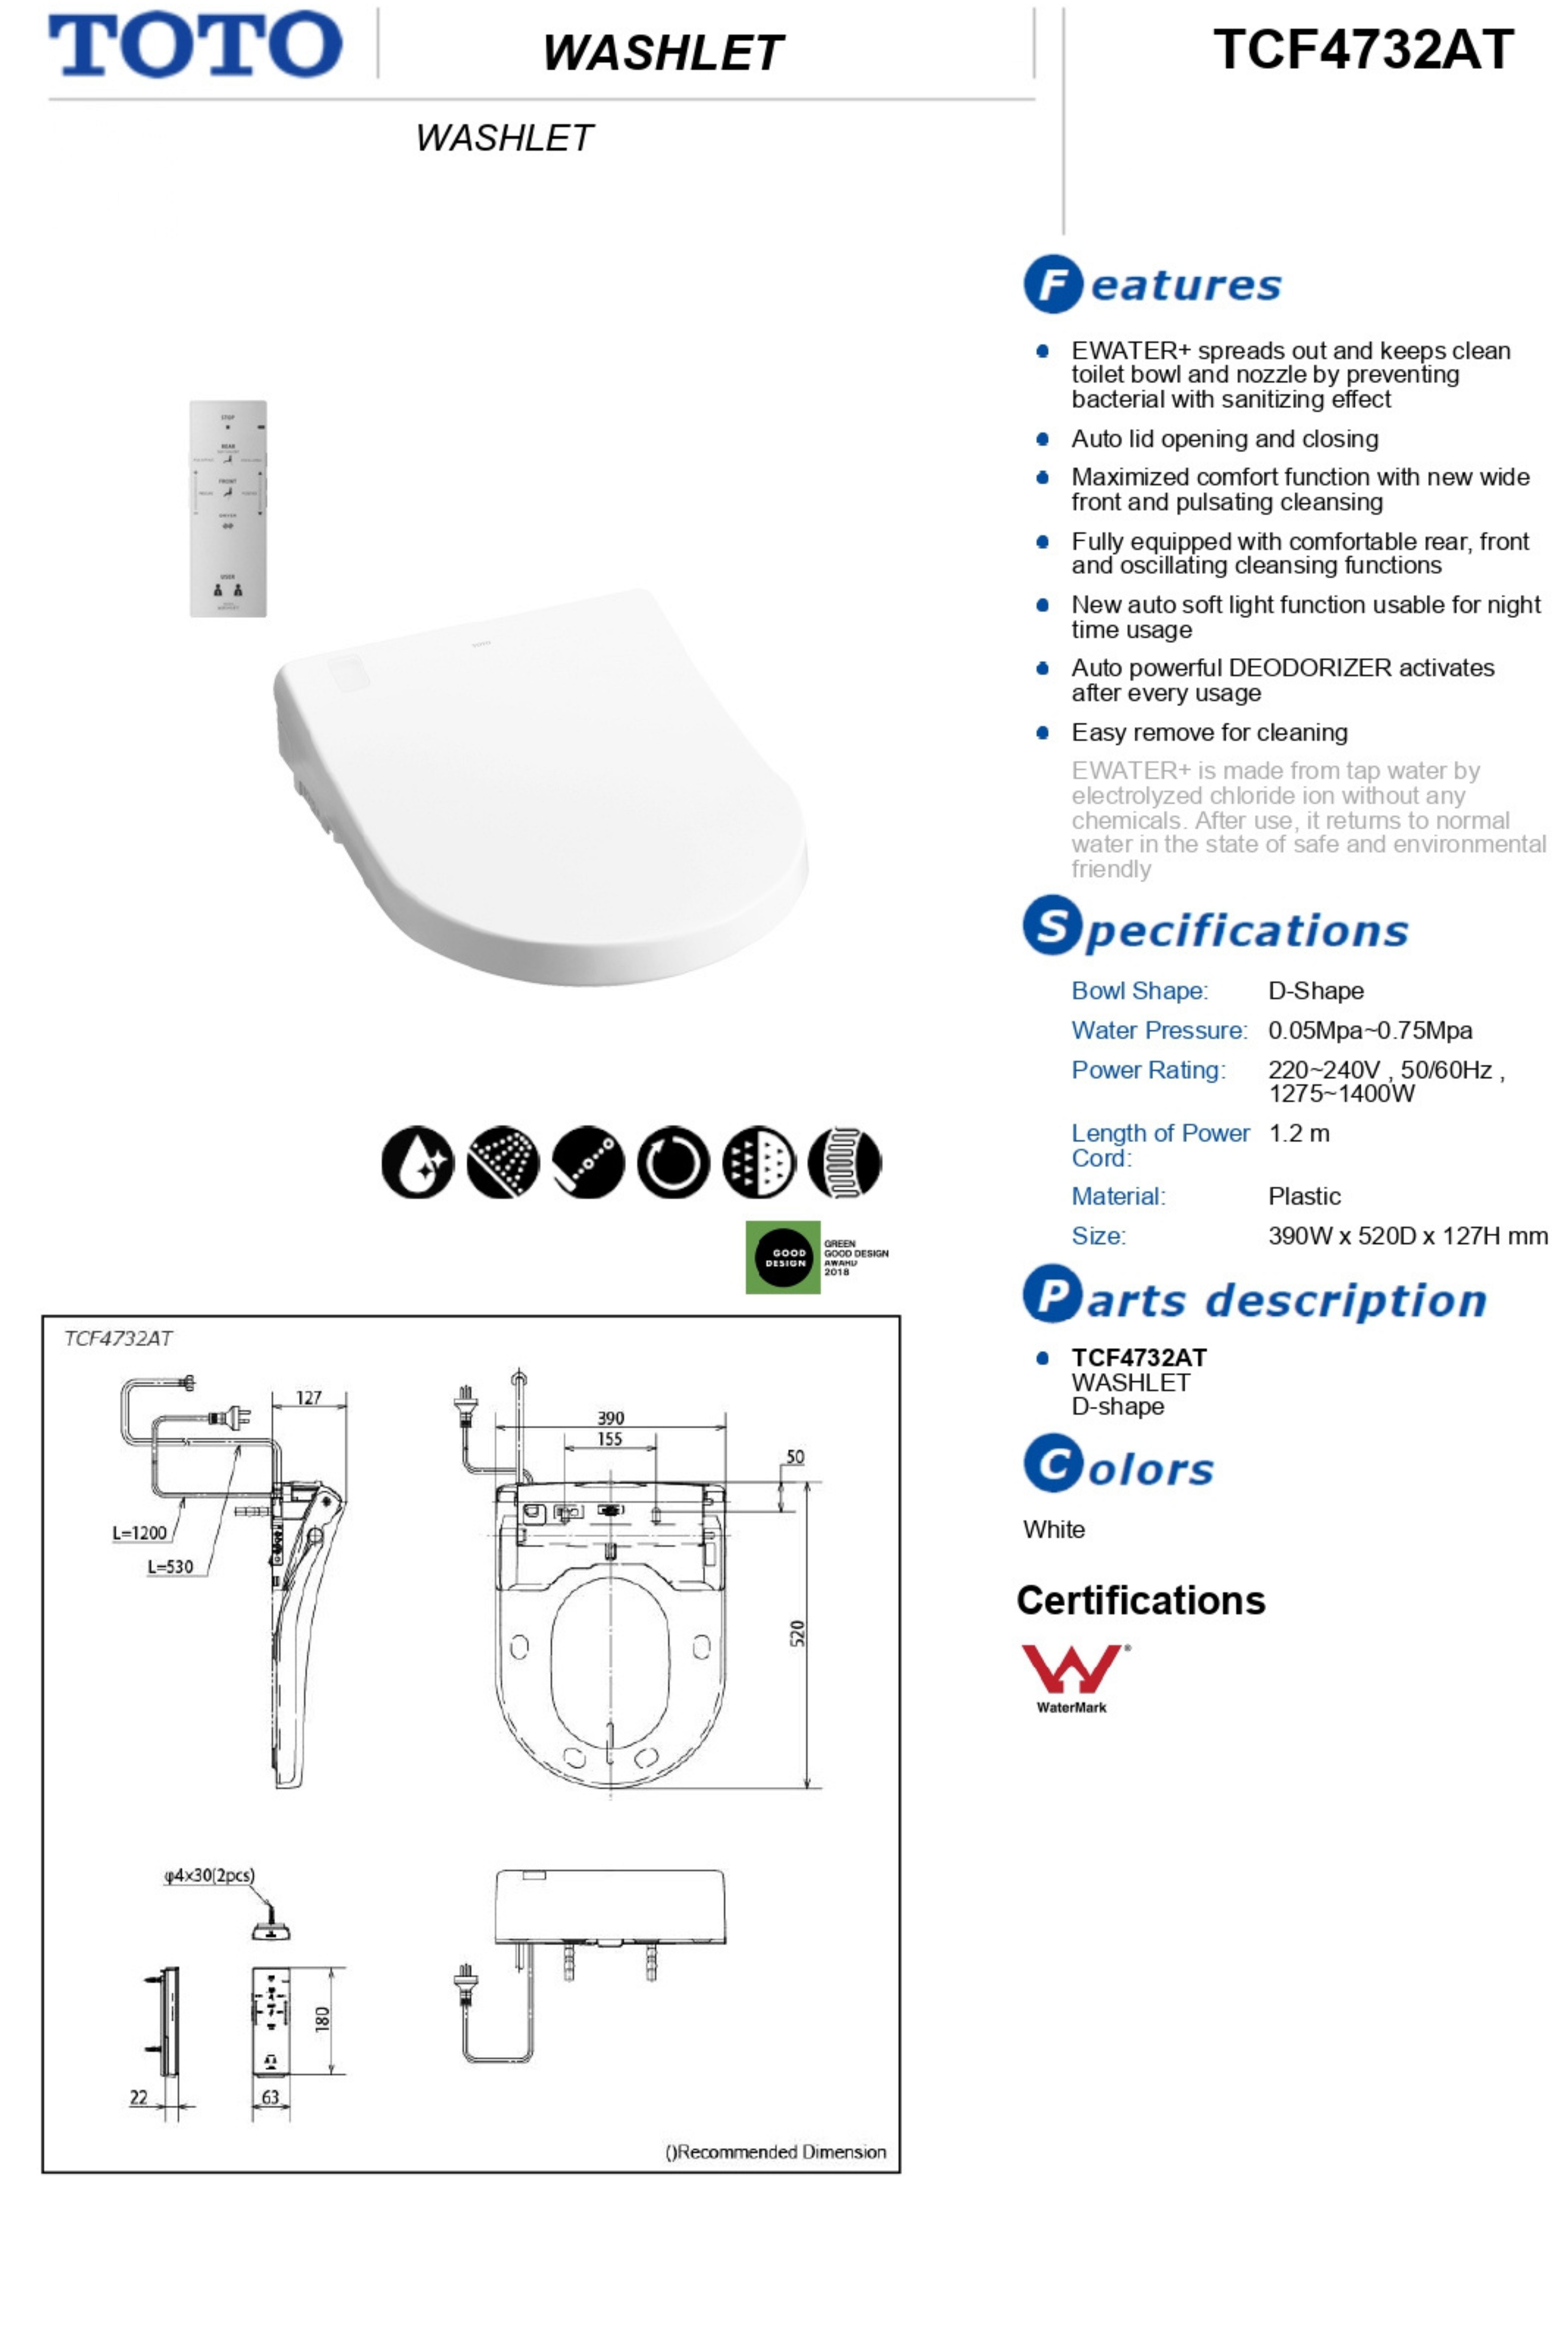 TOTO BASIC+ WASHLET W/ REMOTE CONTROL AND AUTOLID D-SHAPE